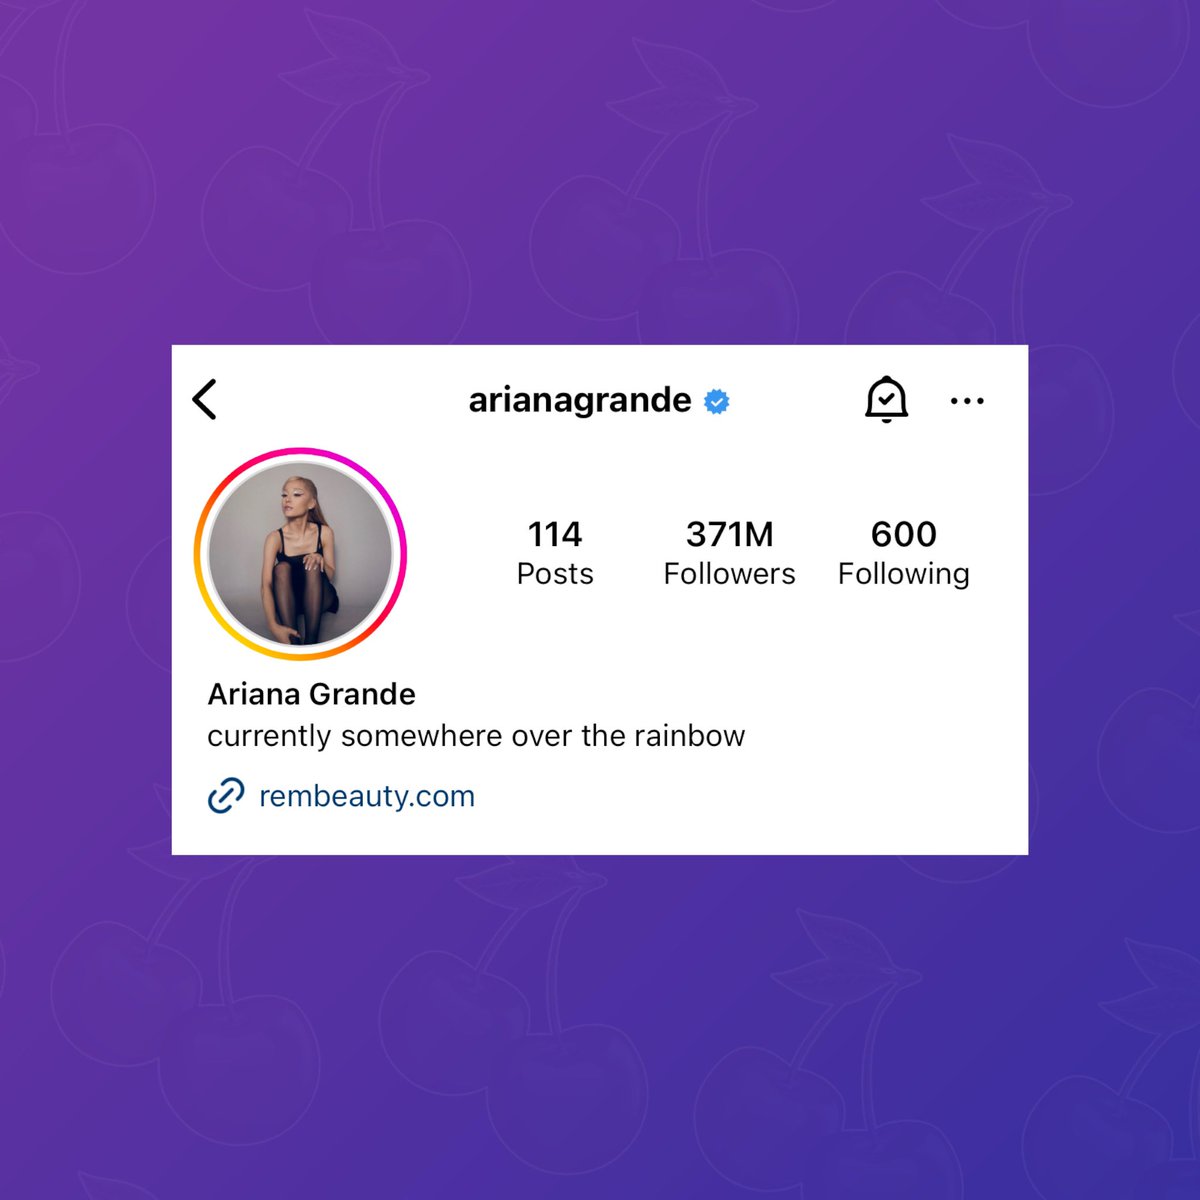 Ariana Grande has archived over 4,000 of her Instagram posts.